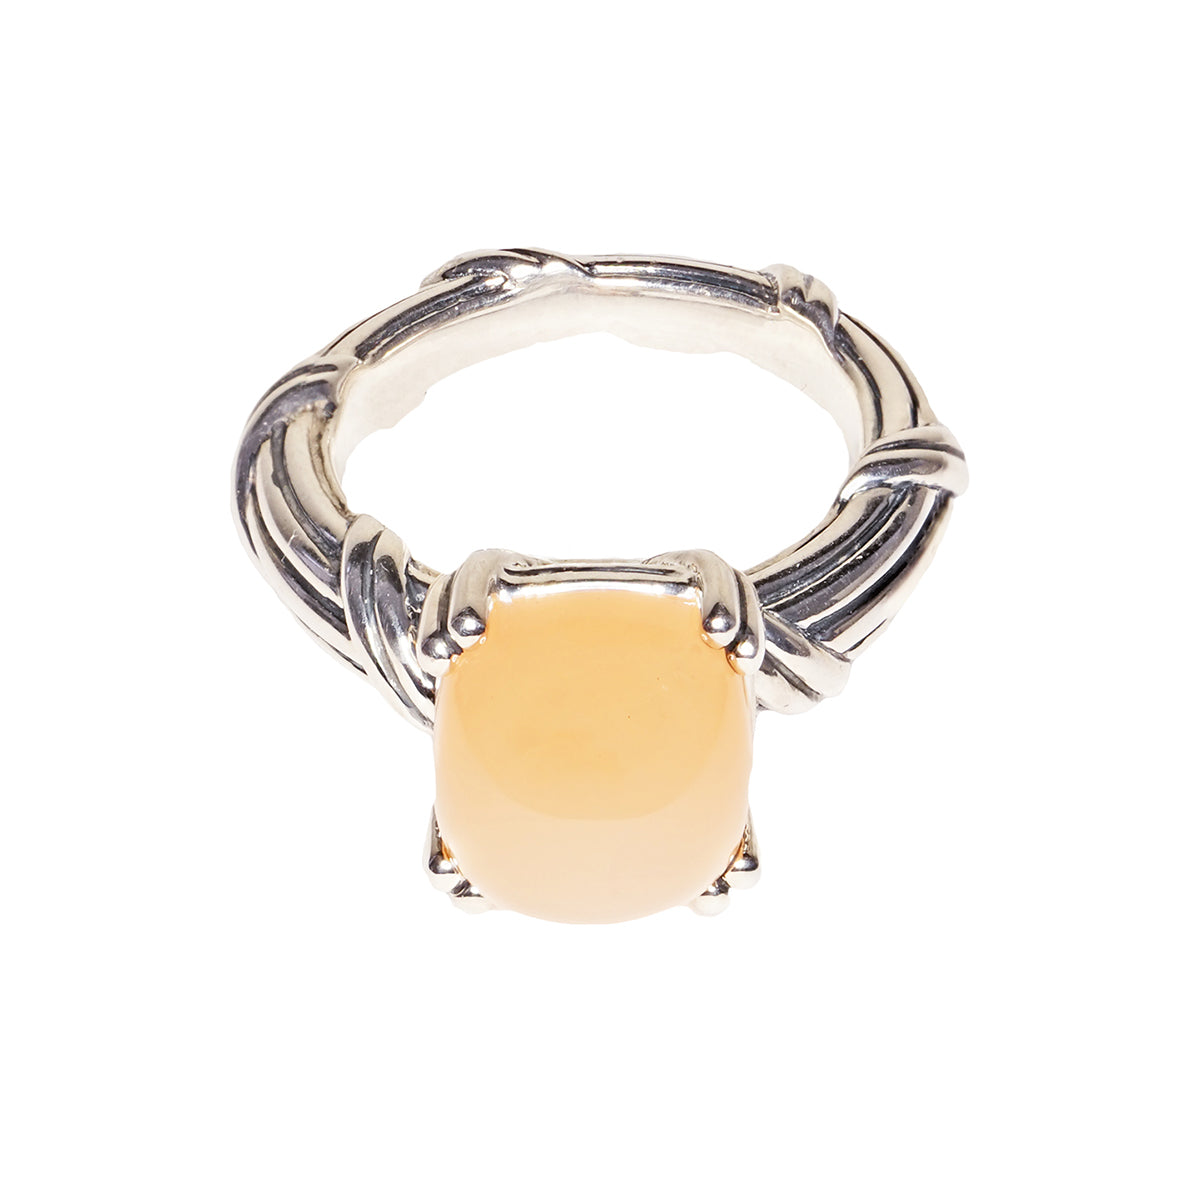 Fantasies Peach Moonstone Cabochon Ring in sterling silver 10mm